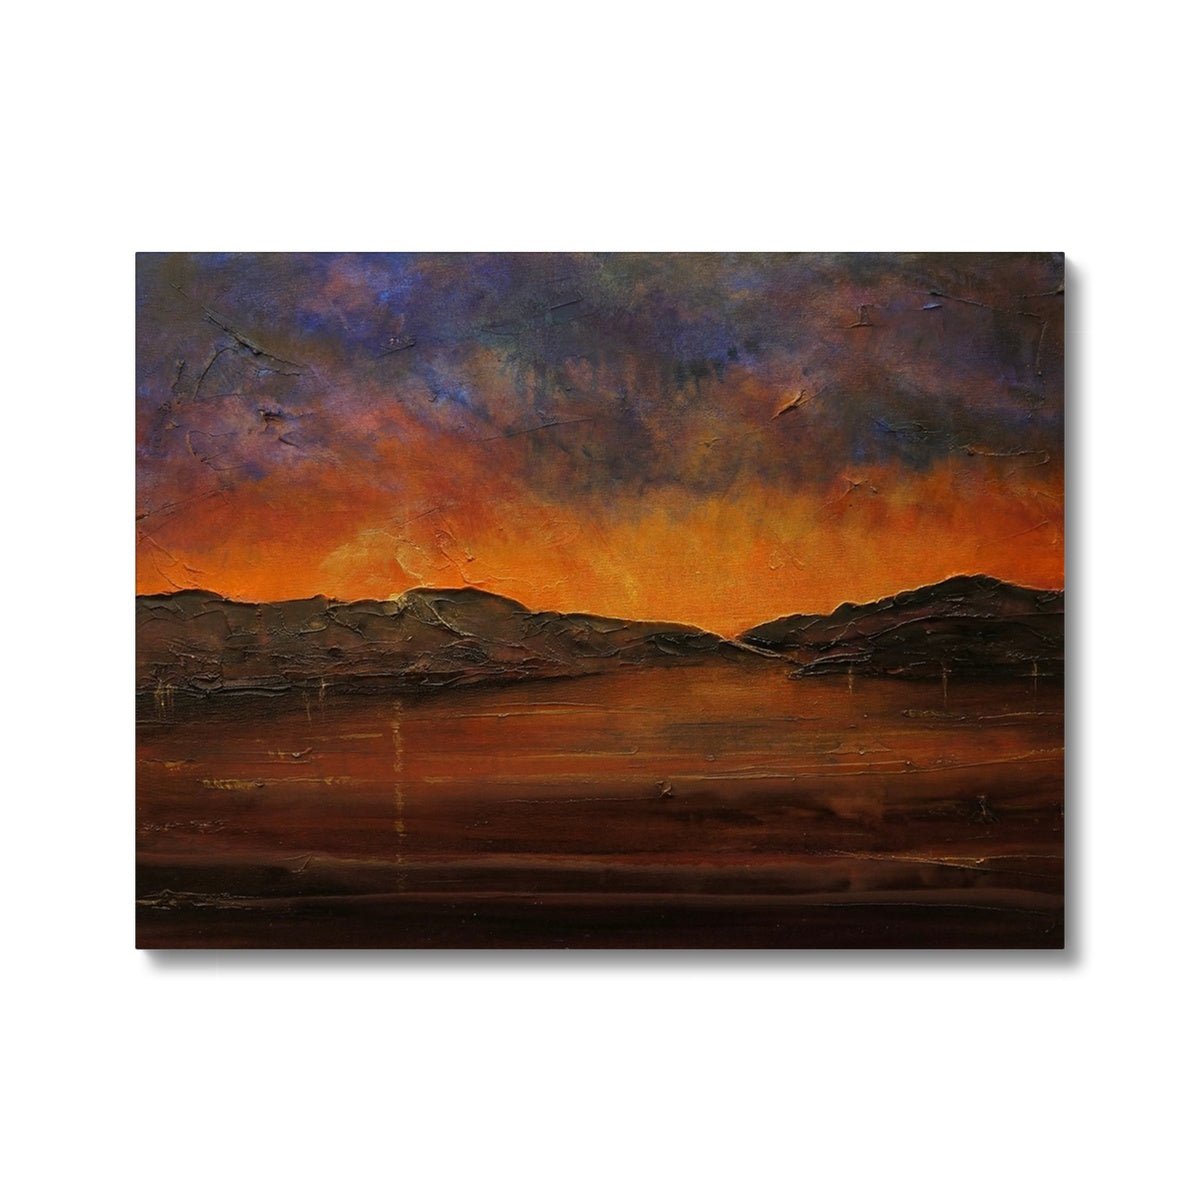 A Brooding River Clyde Dusk Painting | Canvas From Scotland-Contemporary Stretched Canvas Prints-River Clyde Art Gallery-24"x18"-Paintings, Prints, Homeware, Art Gifts From Scotland By Scottish Artist Kevin Hunter